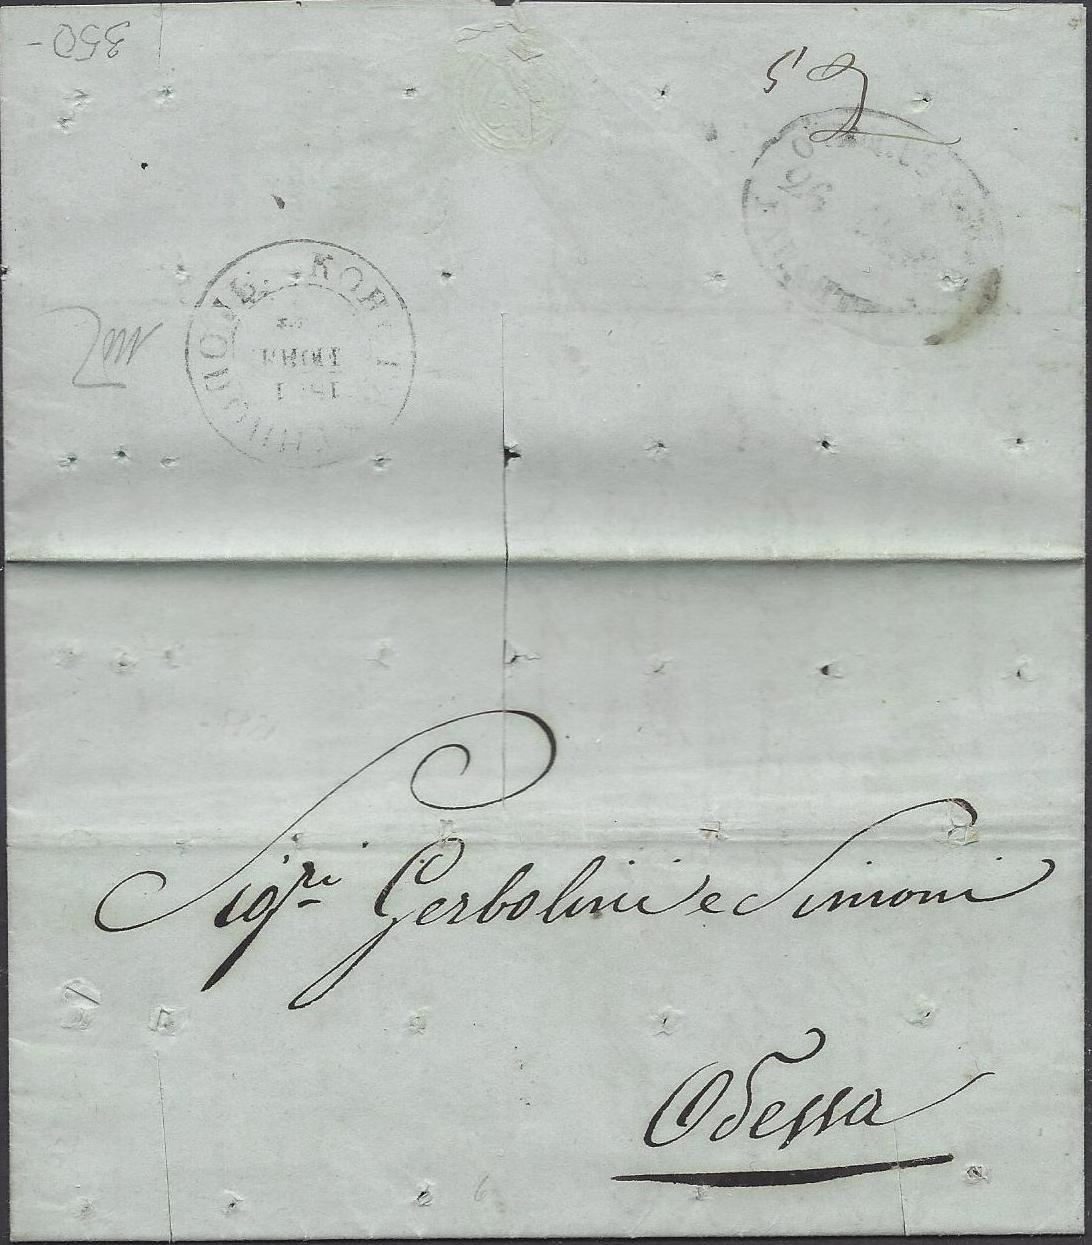 Russia Postal History - Disinfected Mail Desinfected mail Scott 1871 